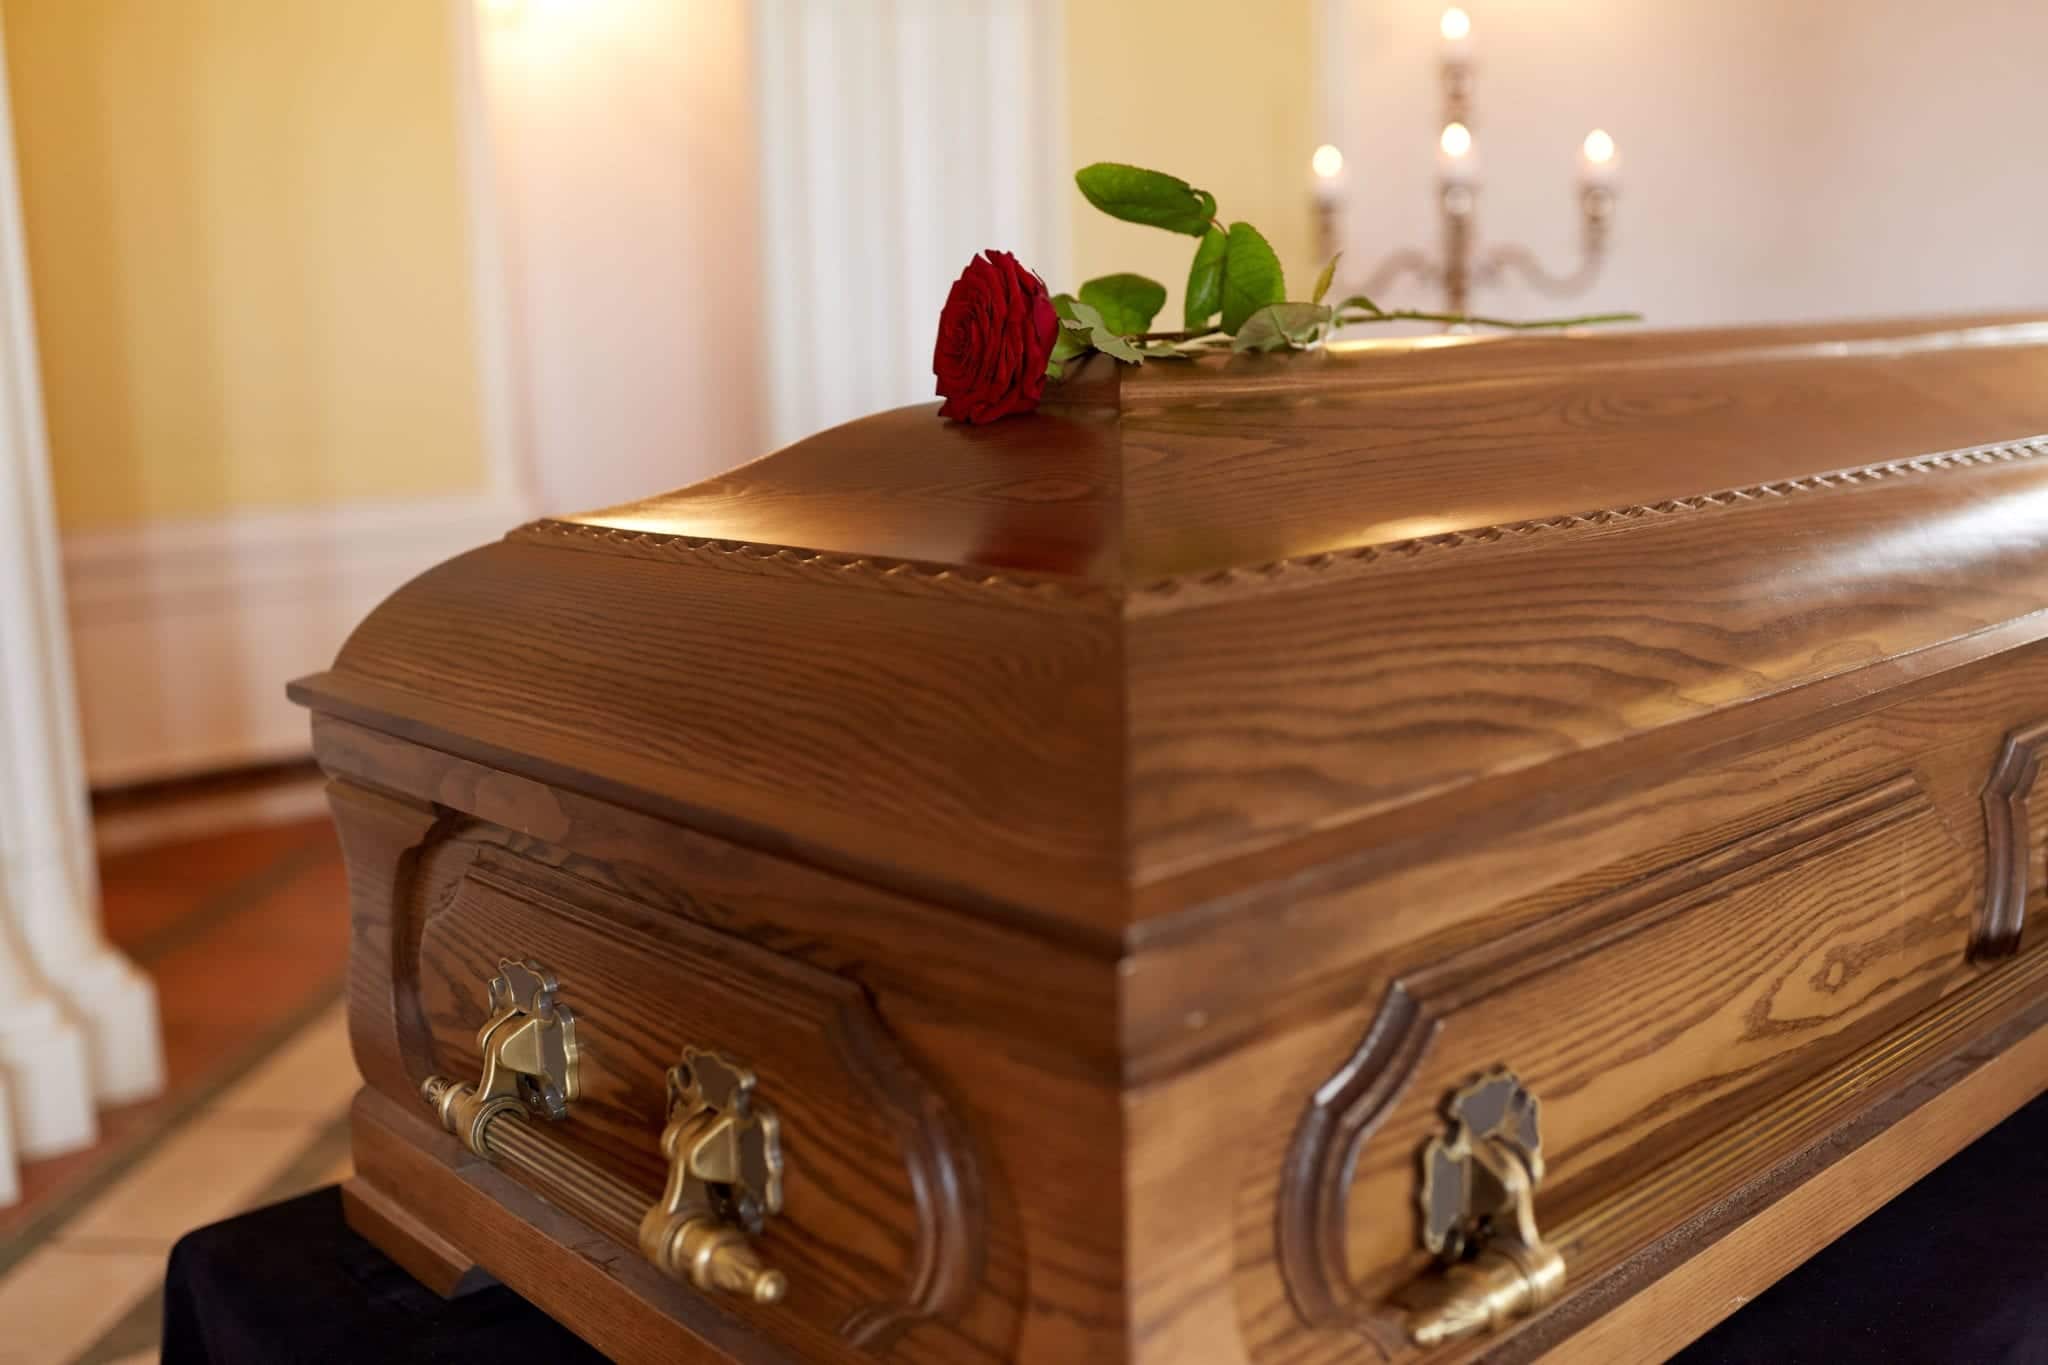 What Makes a Death “Wrongful” In Florida?